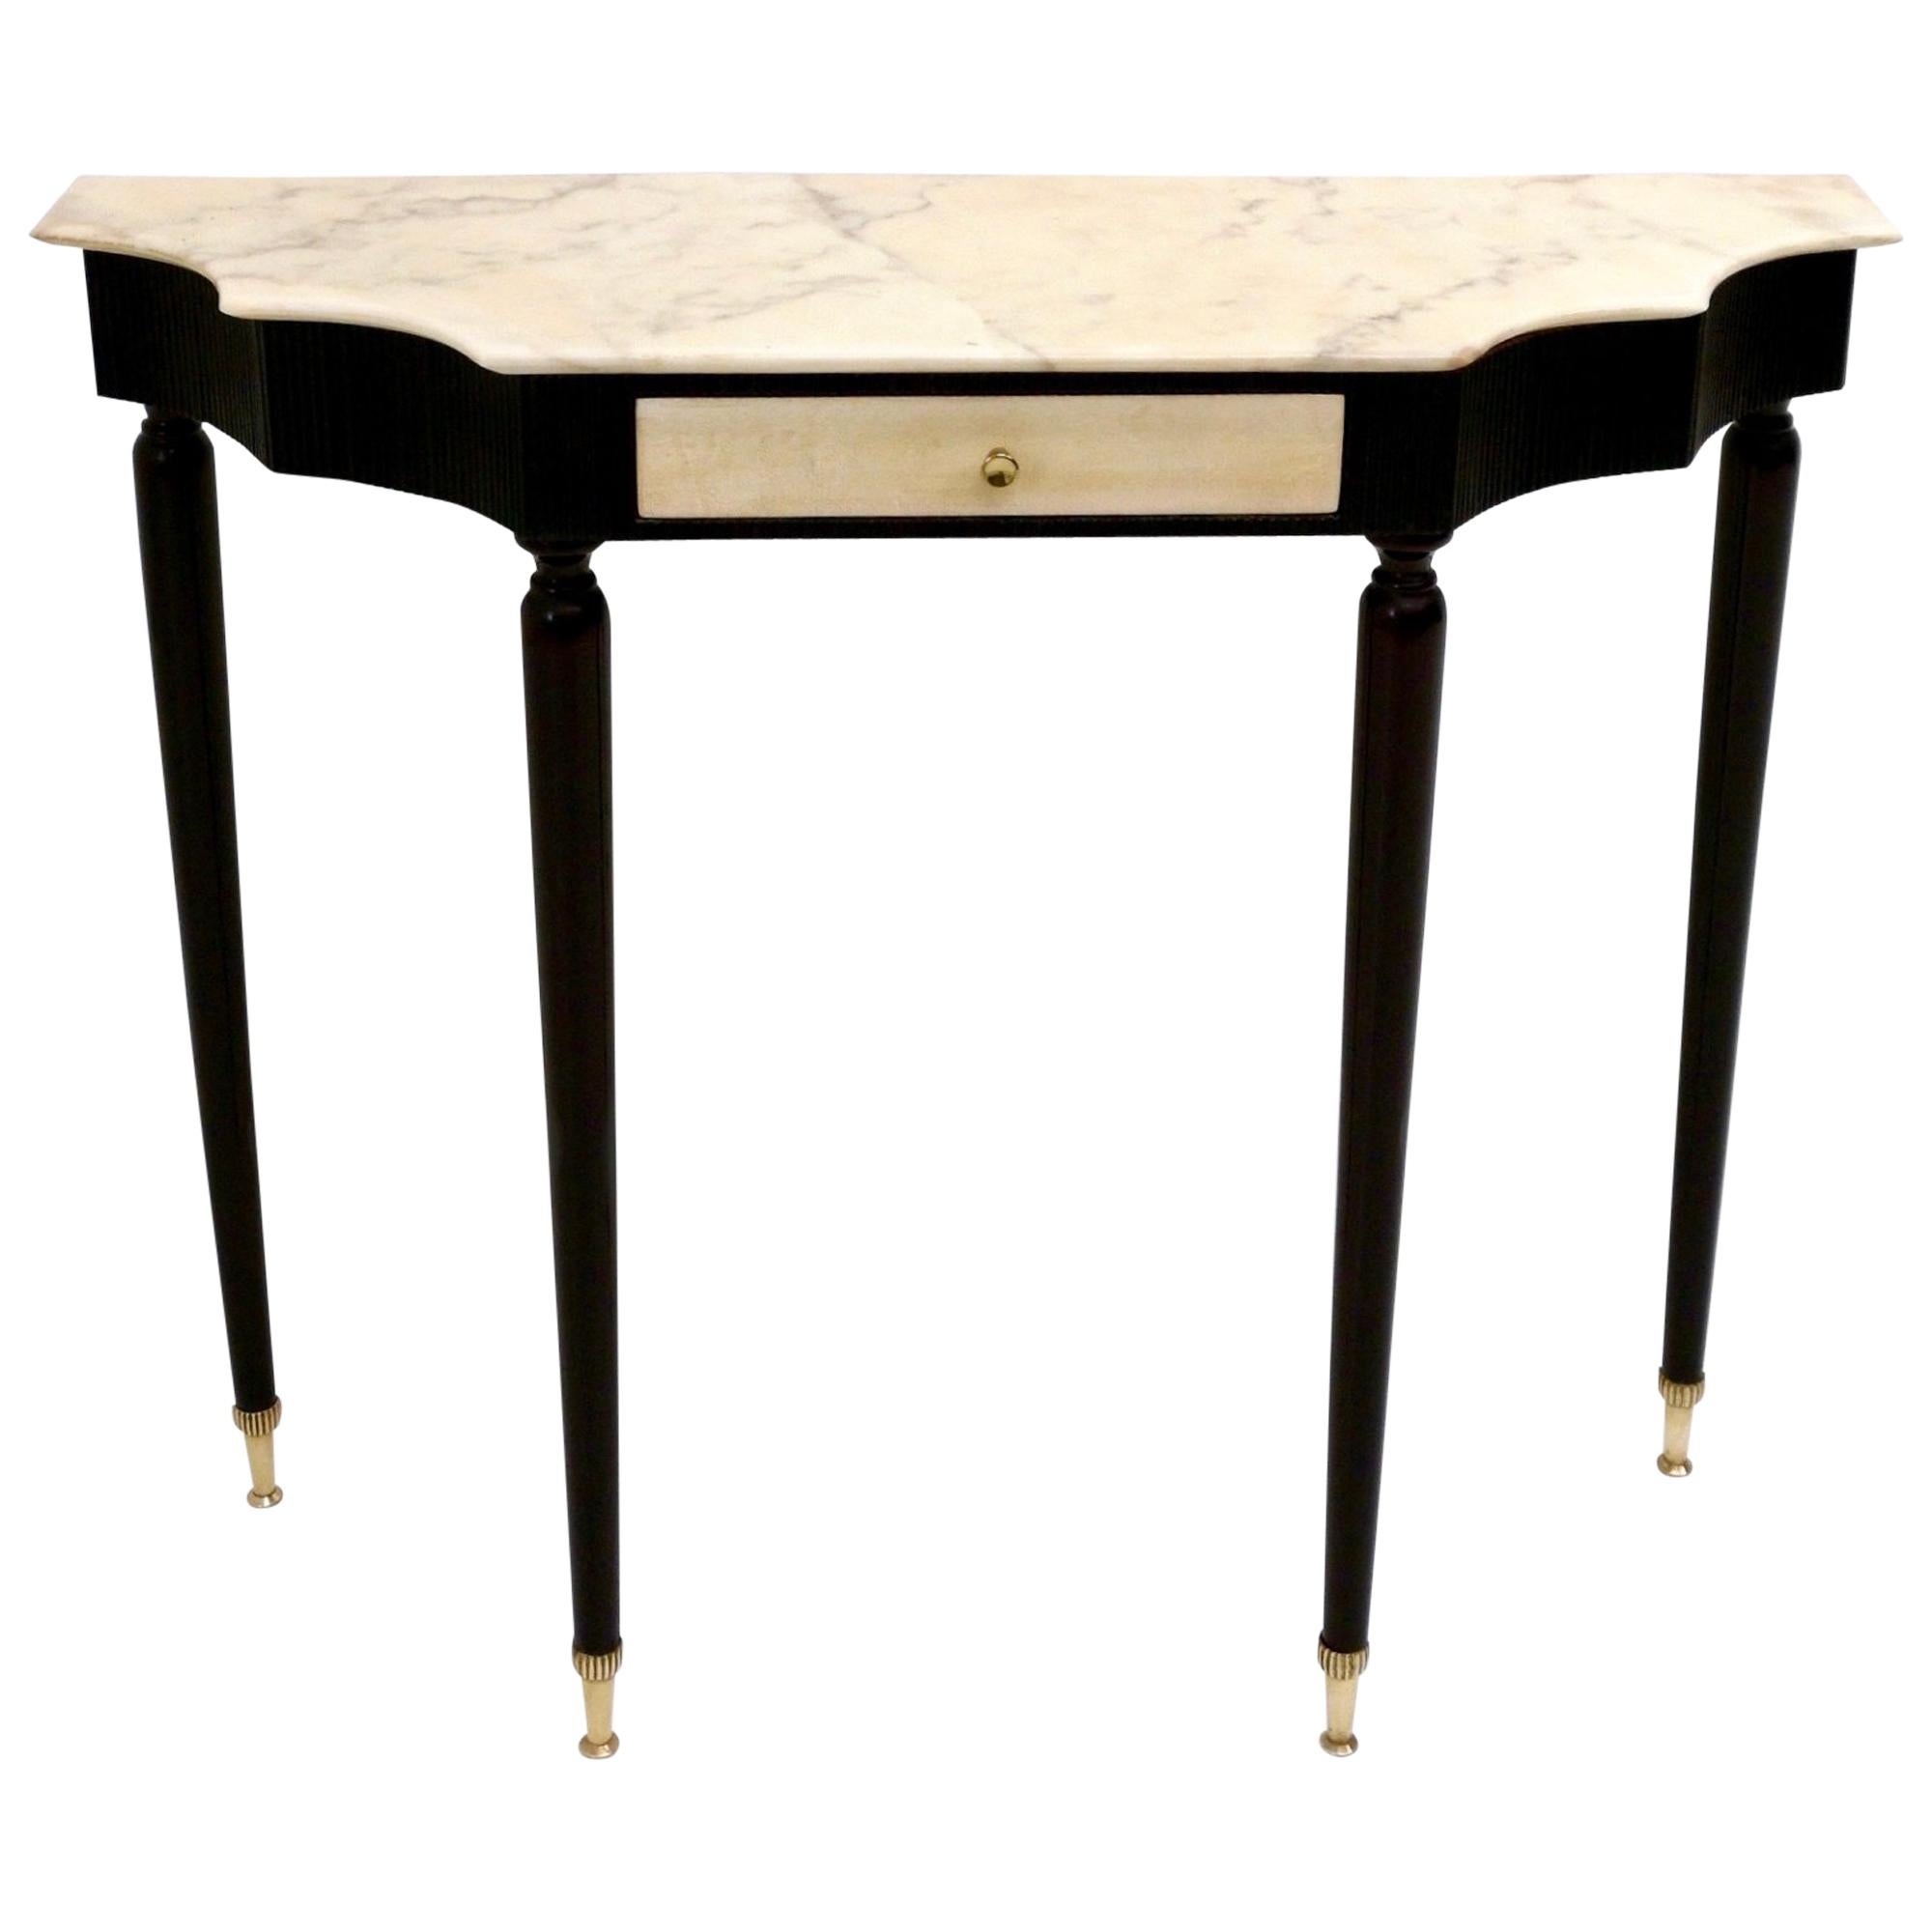 Midcentury Ebonized Console Table with Portuguese Pink Marble Top, Italy, 1950s